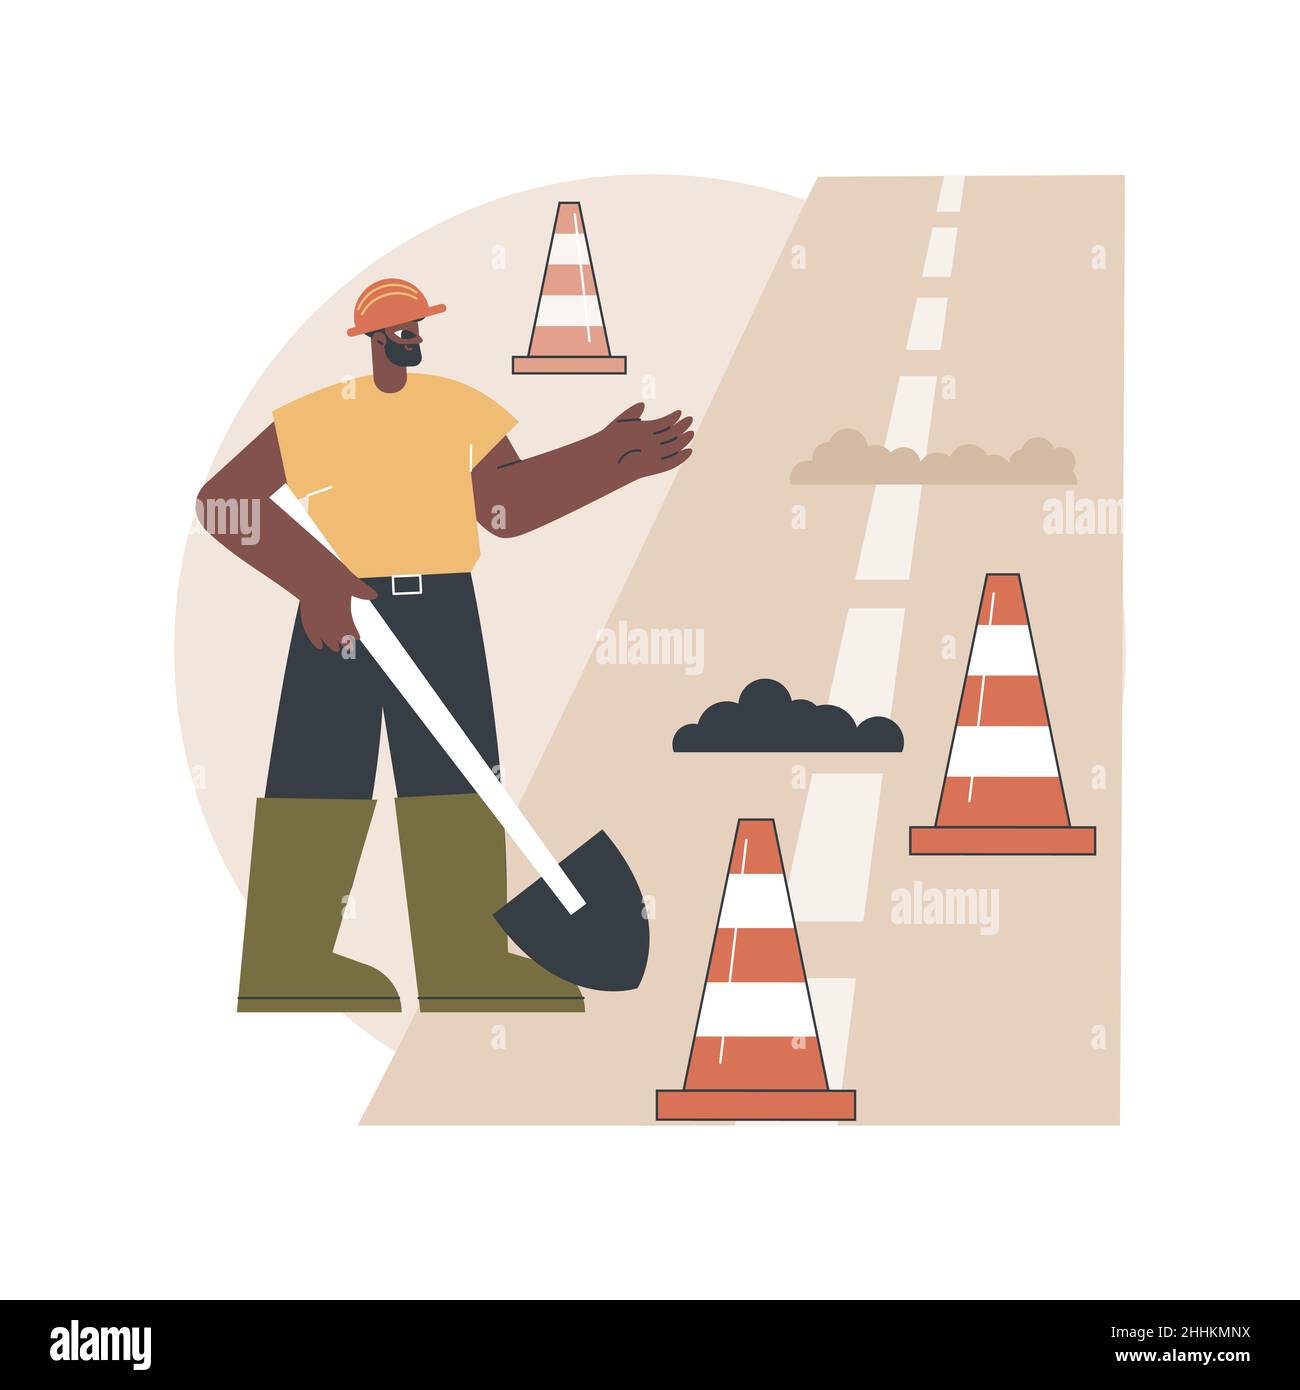 Road works abstract concept vector illustration. Road construction and repair, restricted driving conditions, partly motorway closure, detour due to works, speed limit sign abstract metaphor. Stock Vector